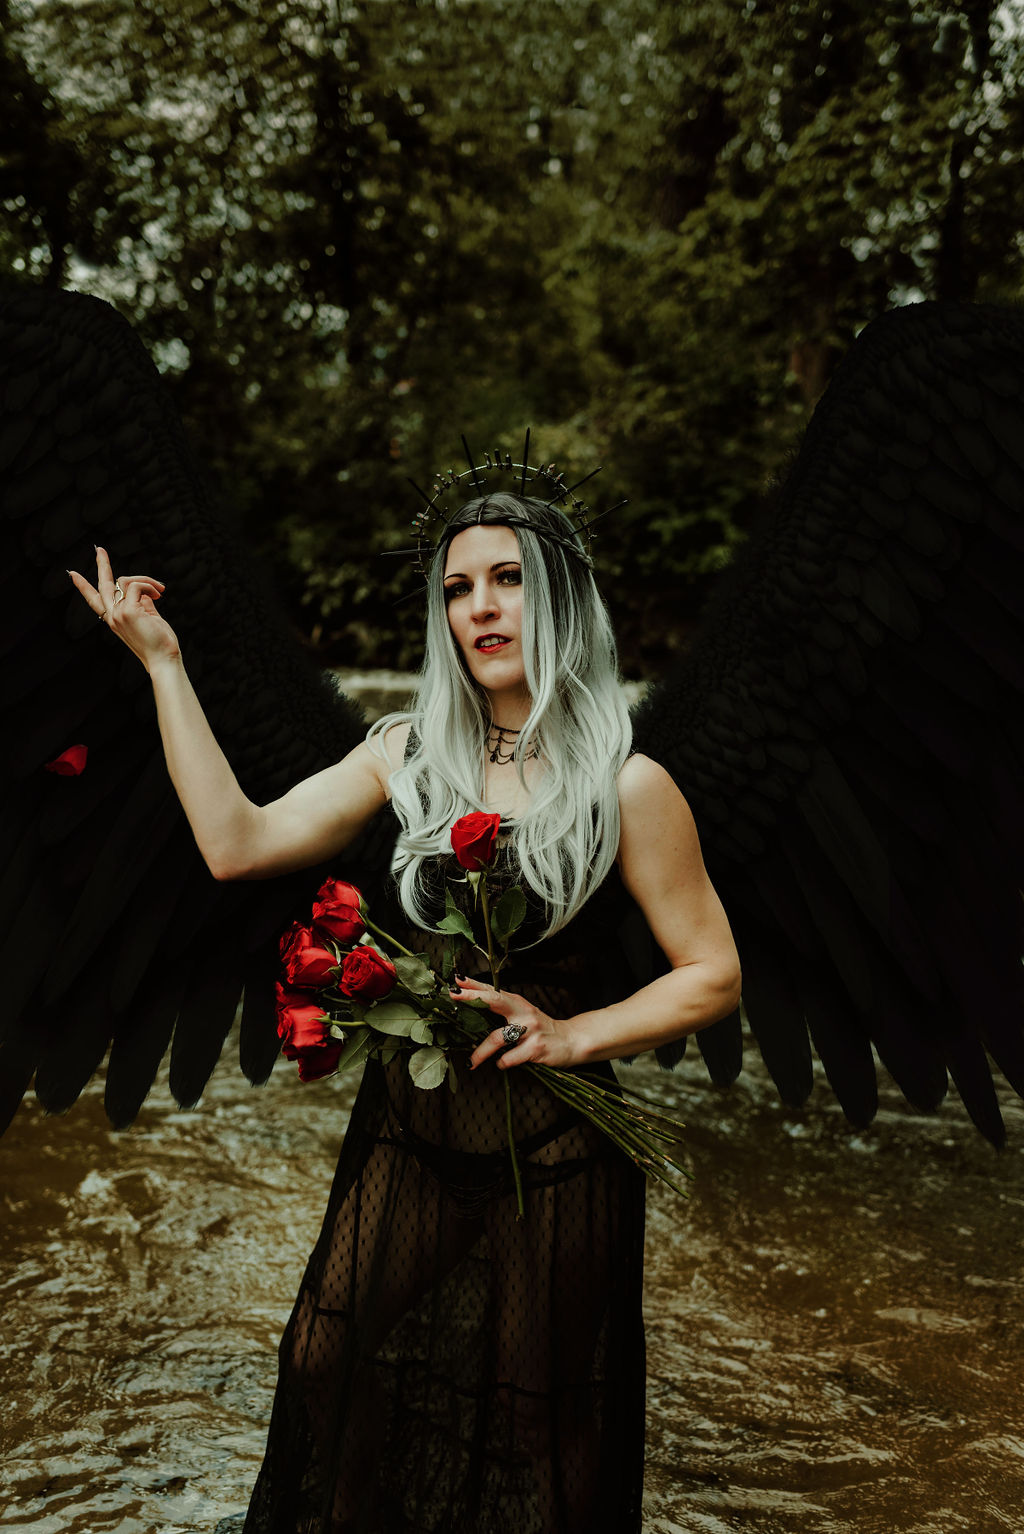 Fantasy photo of a person with large black wings stands in a shallow stream in a forest. The person is wearing a black dress with a sheer skirt. The person is holding a red rose in their hand.